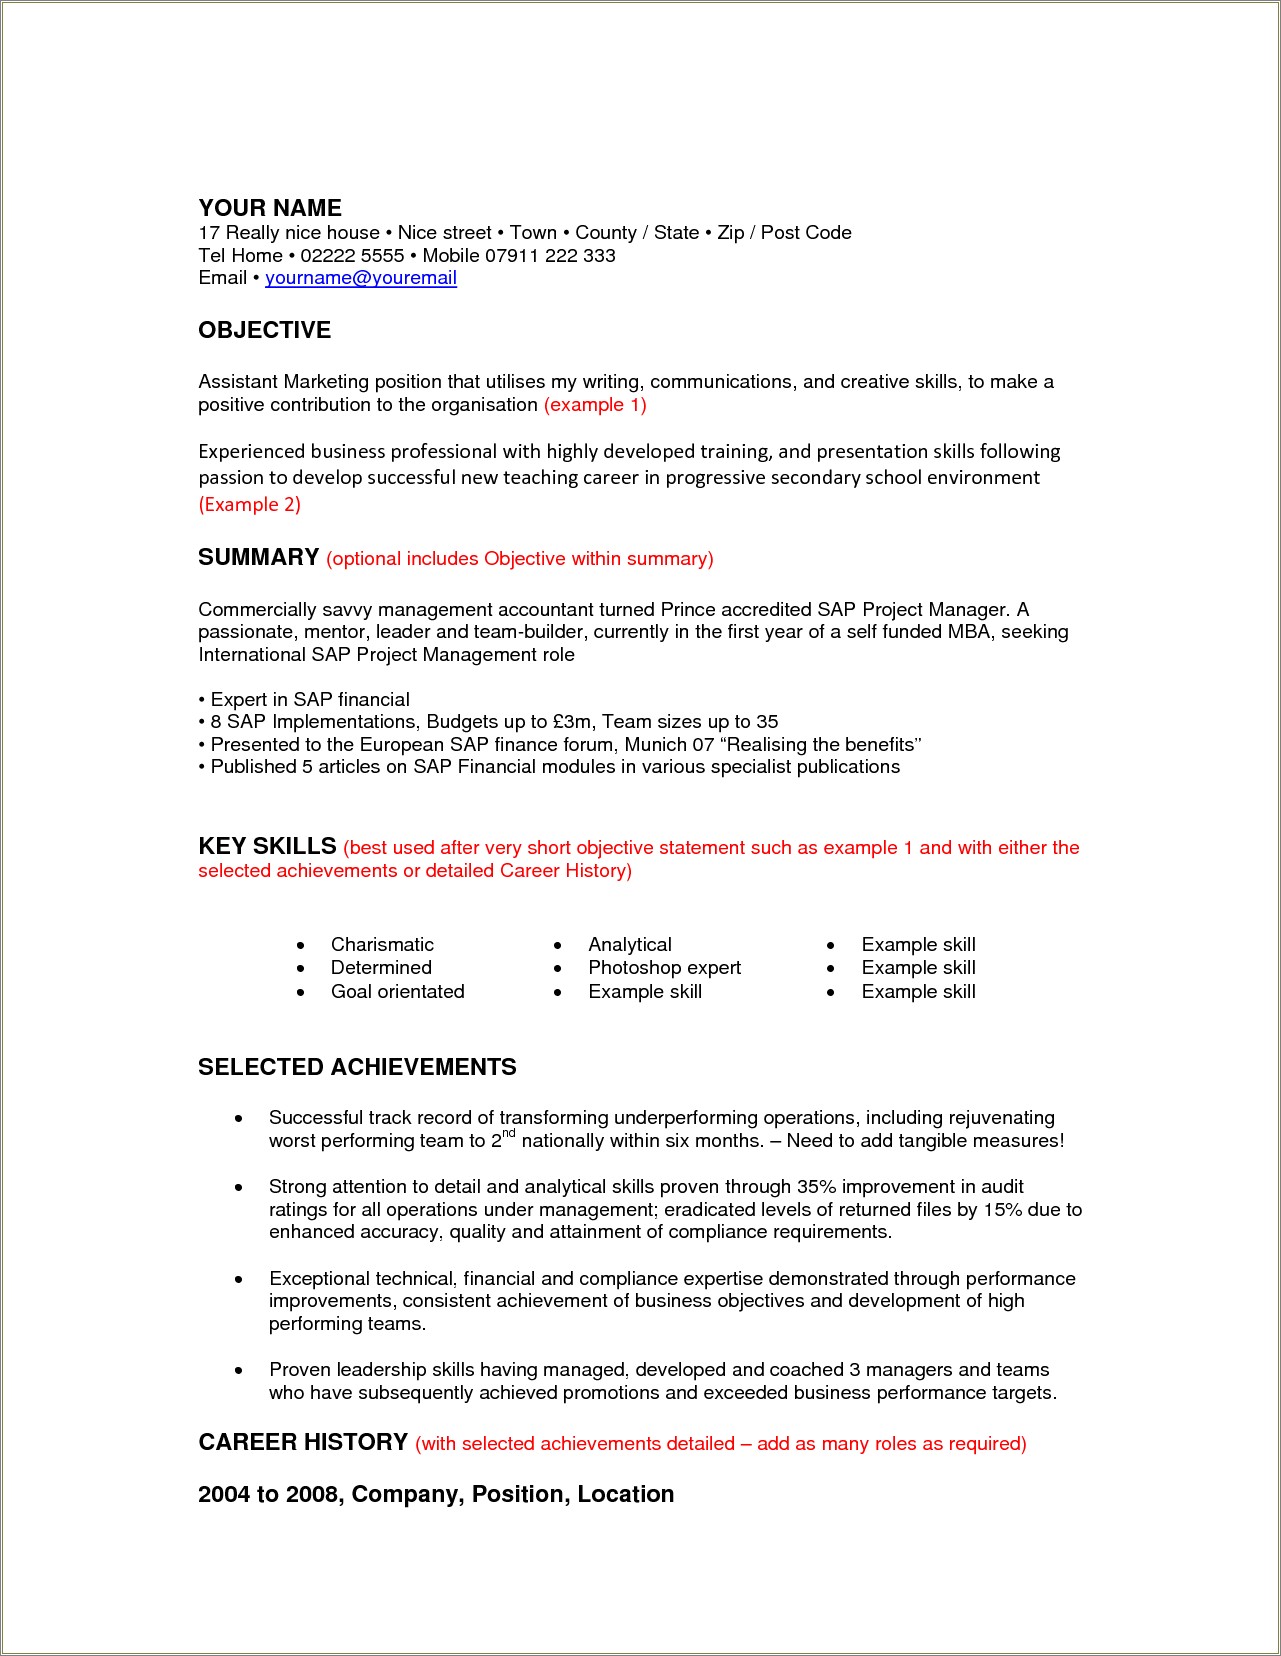 Objective Used On Resume For Career Change